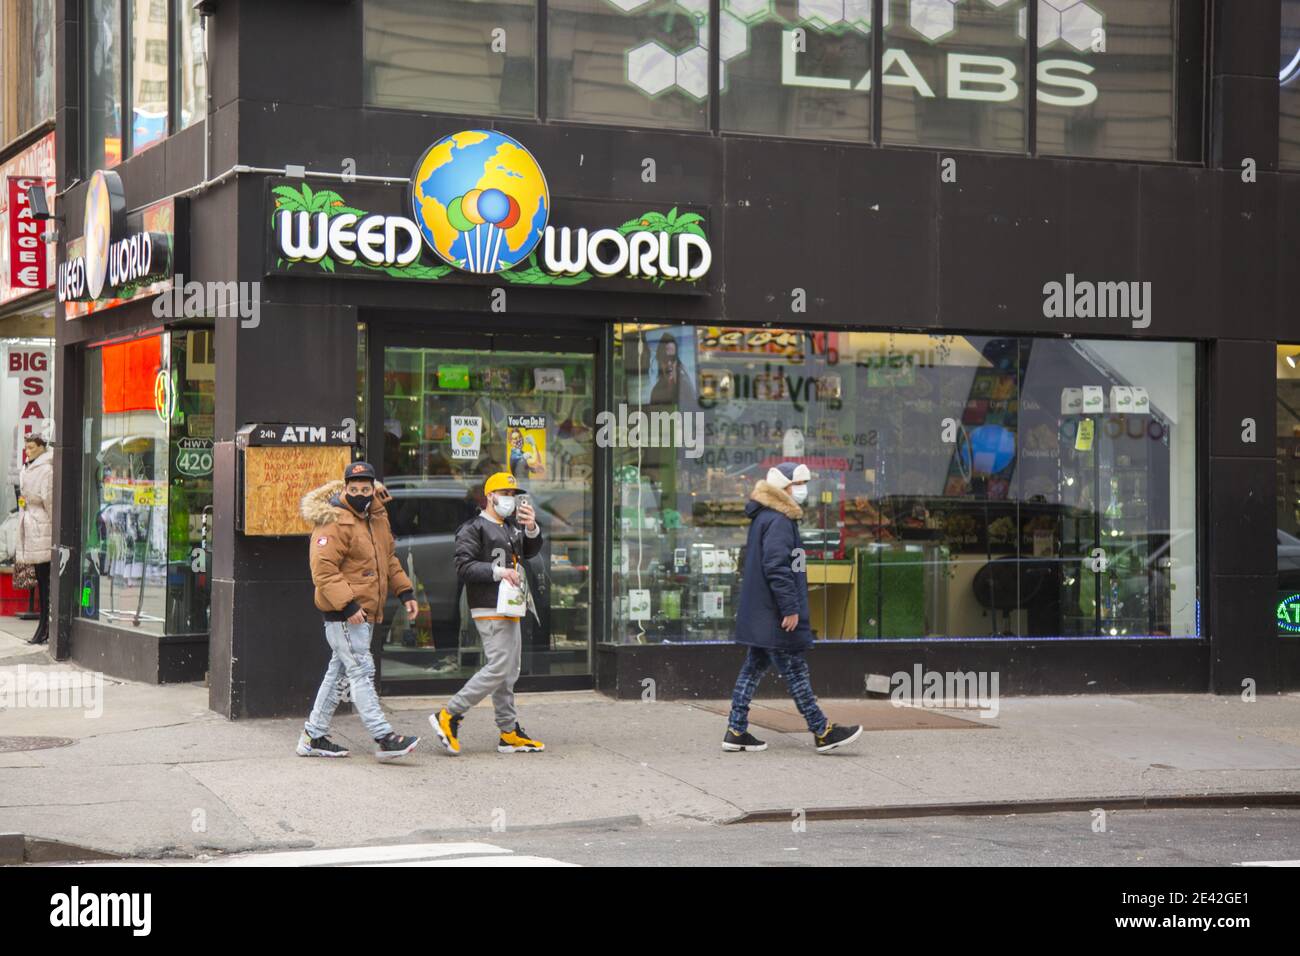 Weed World a retail Marijuana shop on 7th Avenue in midtown Manhattan gets mixed reviews by the public in New York City. Stock Photo